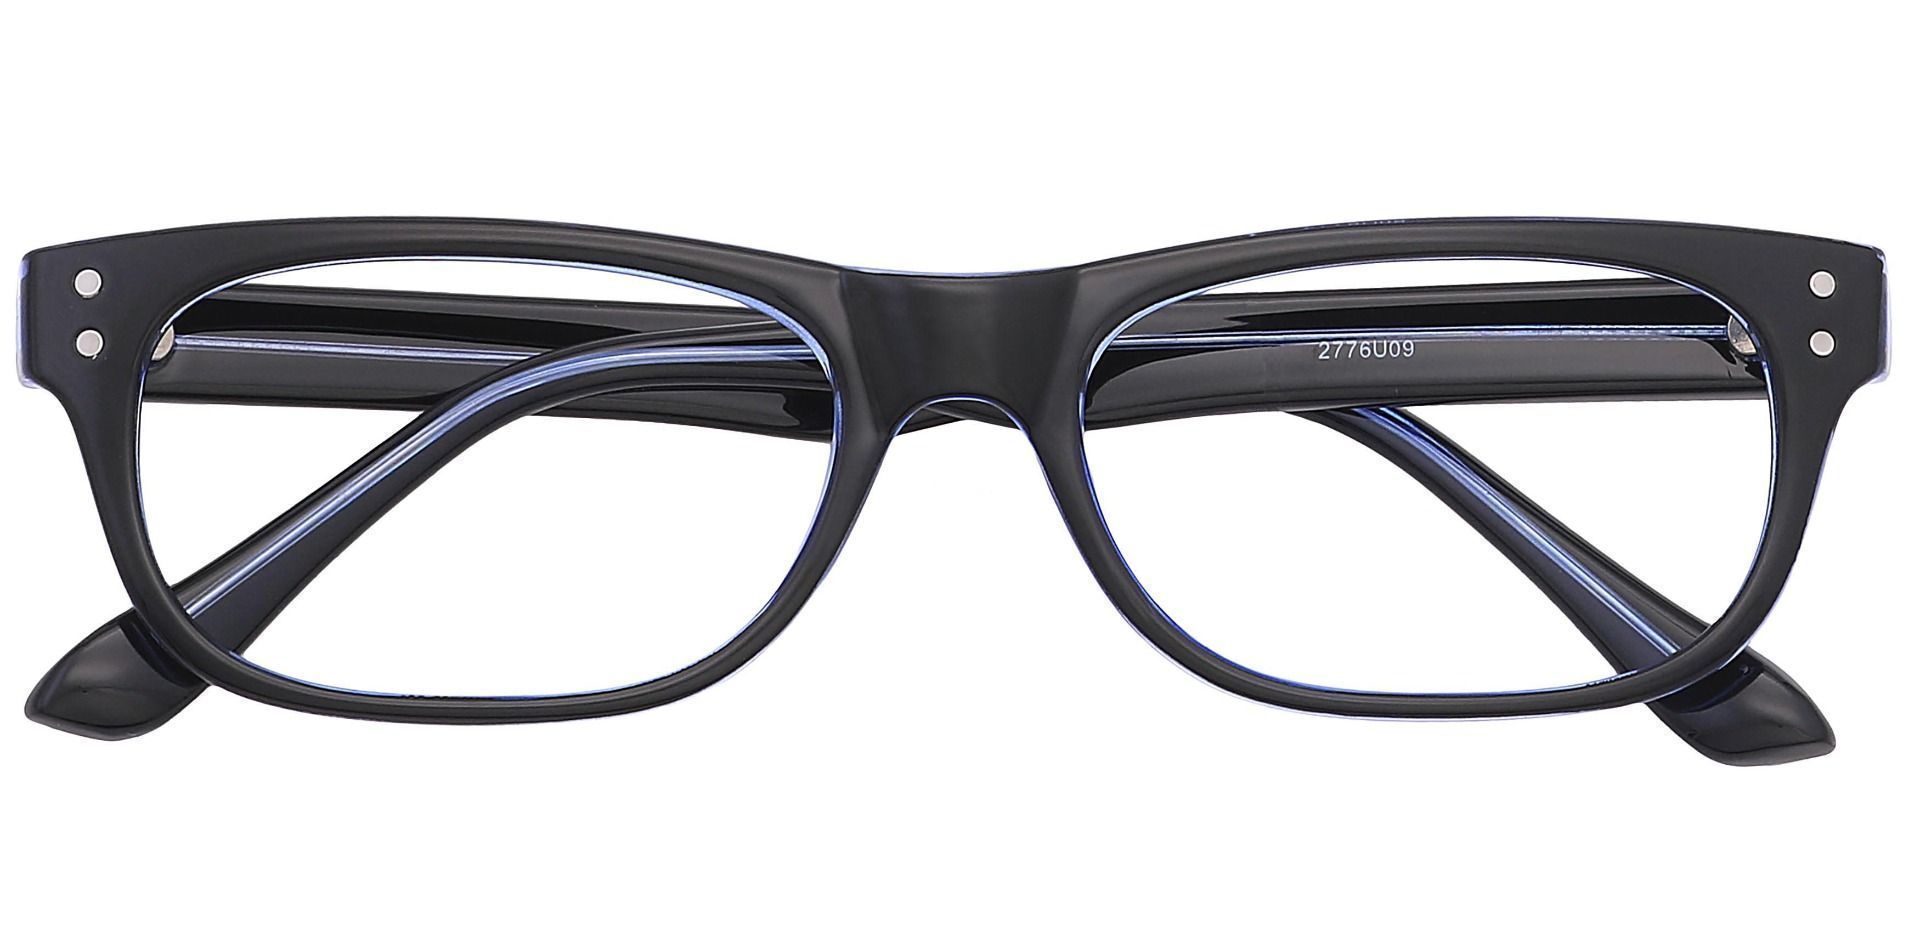 Murphy Rectangle Blue Light Blocking Glasses - The Frame Is Blue And Black